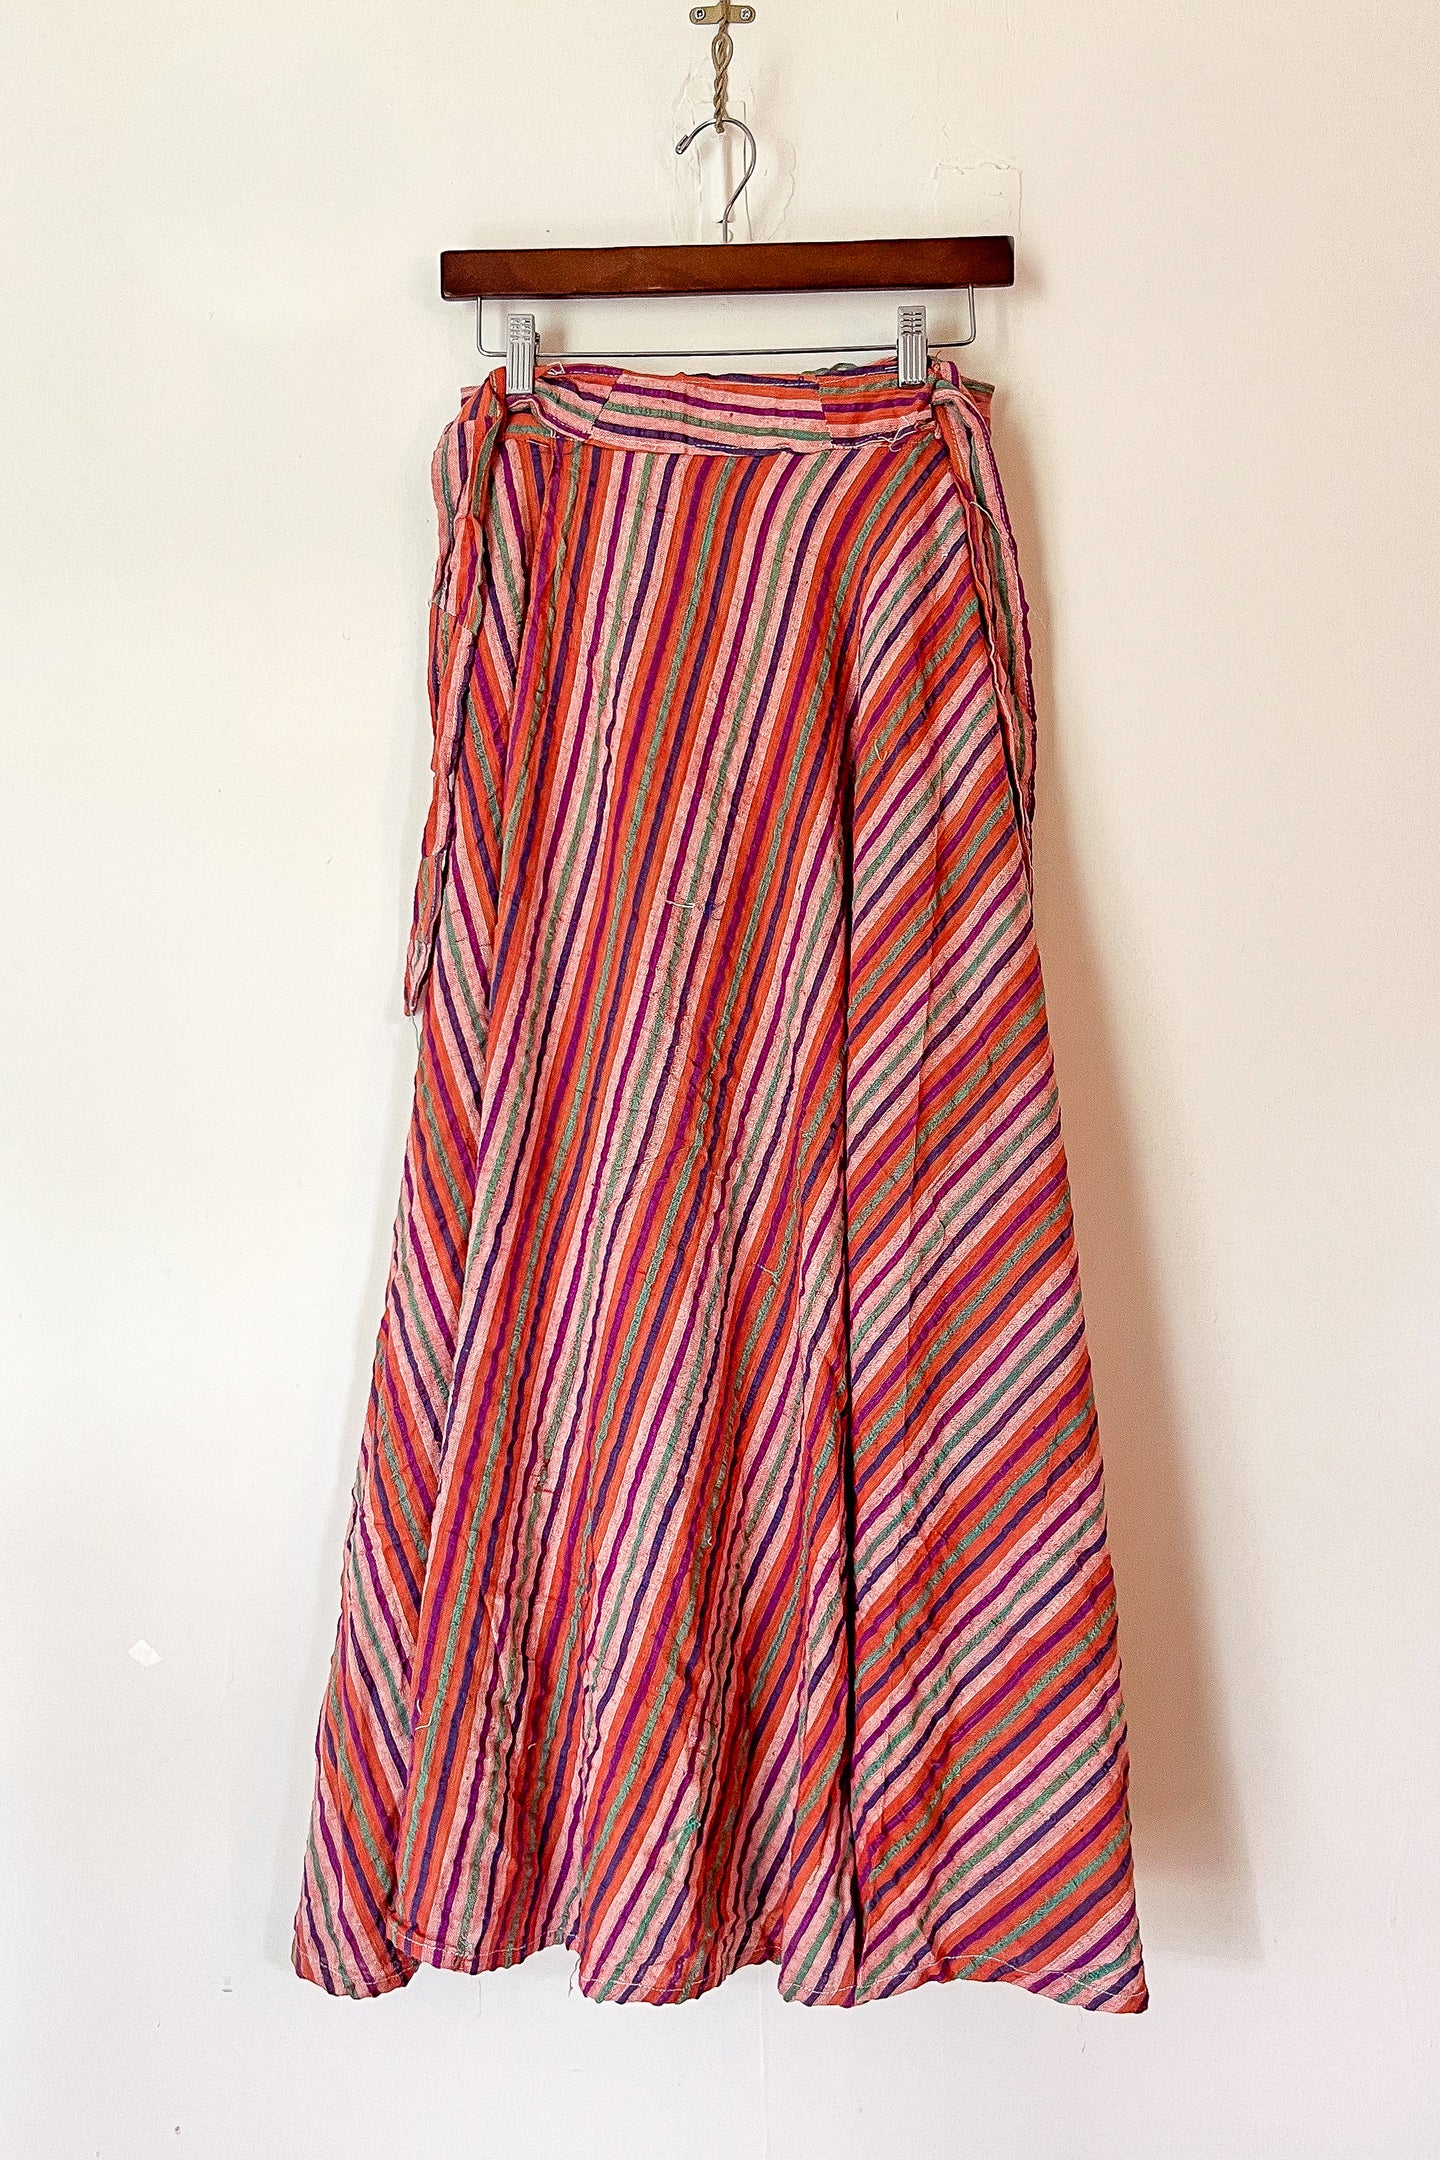 Vintage Indian Cotton Coral Striped Wrap Skirt / XSmall - Small